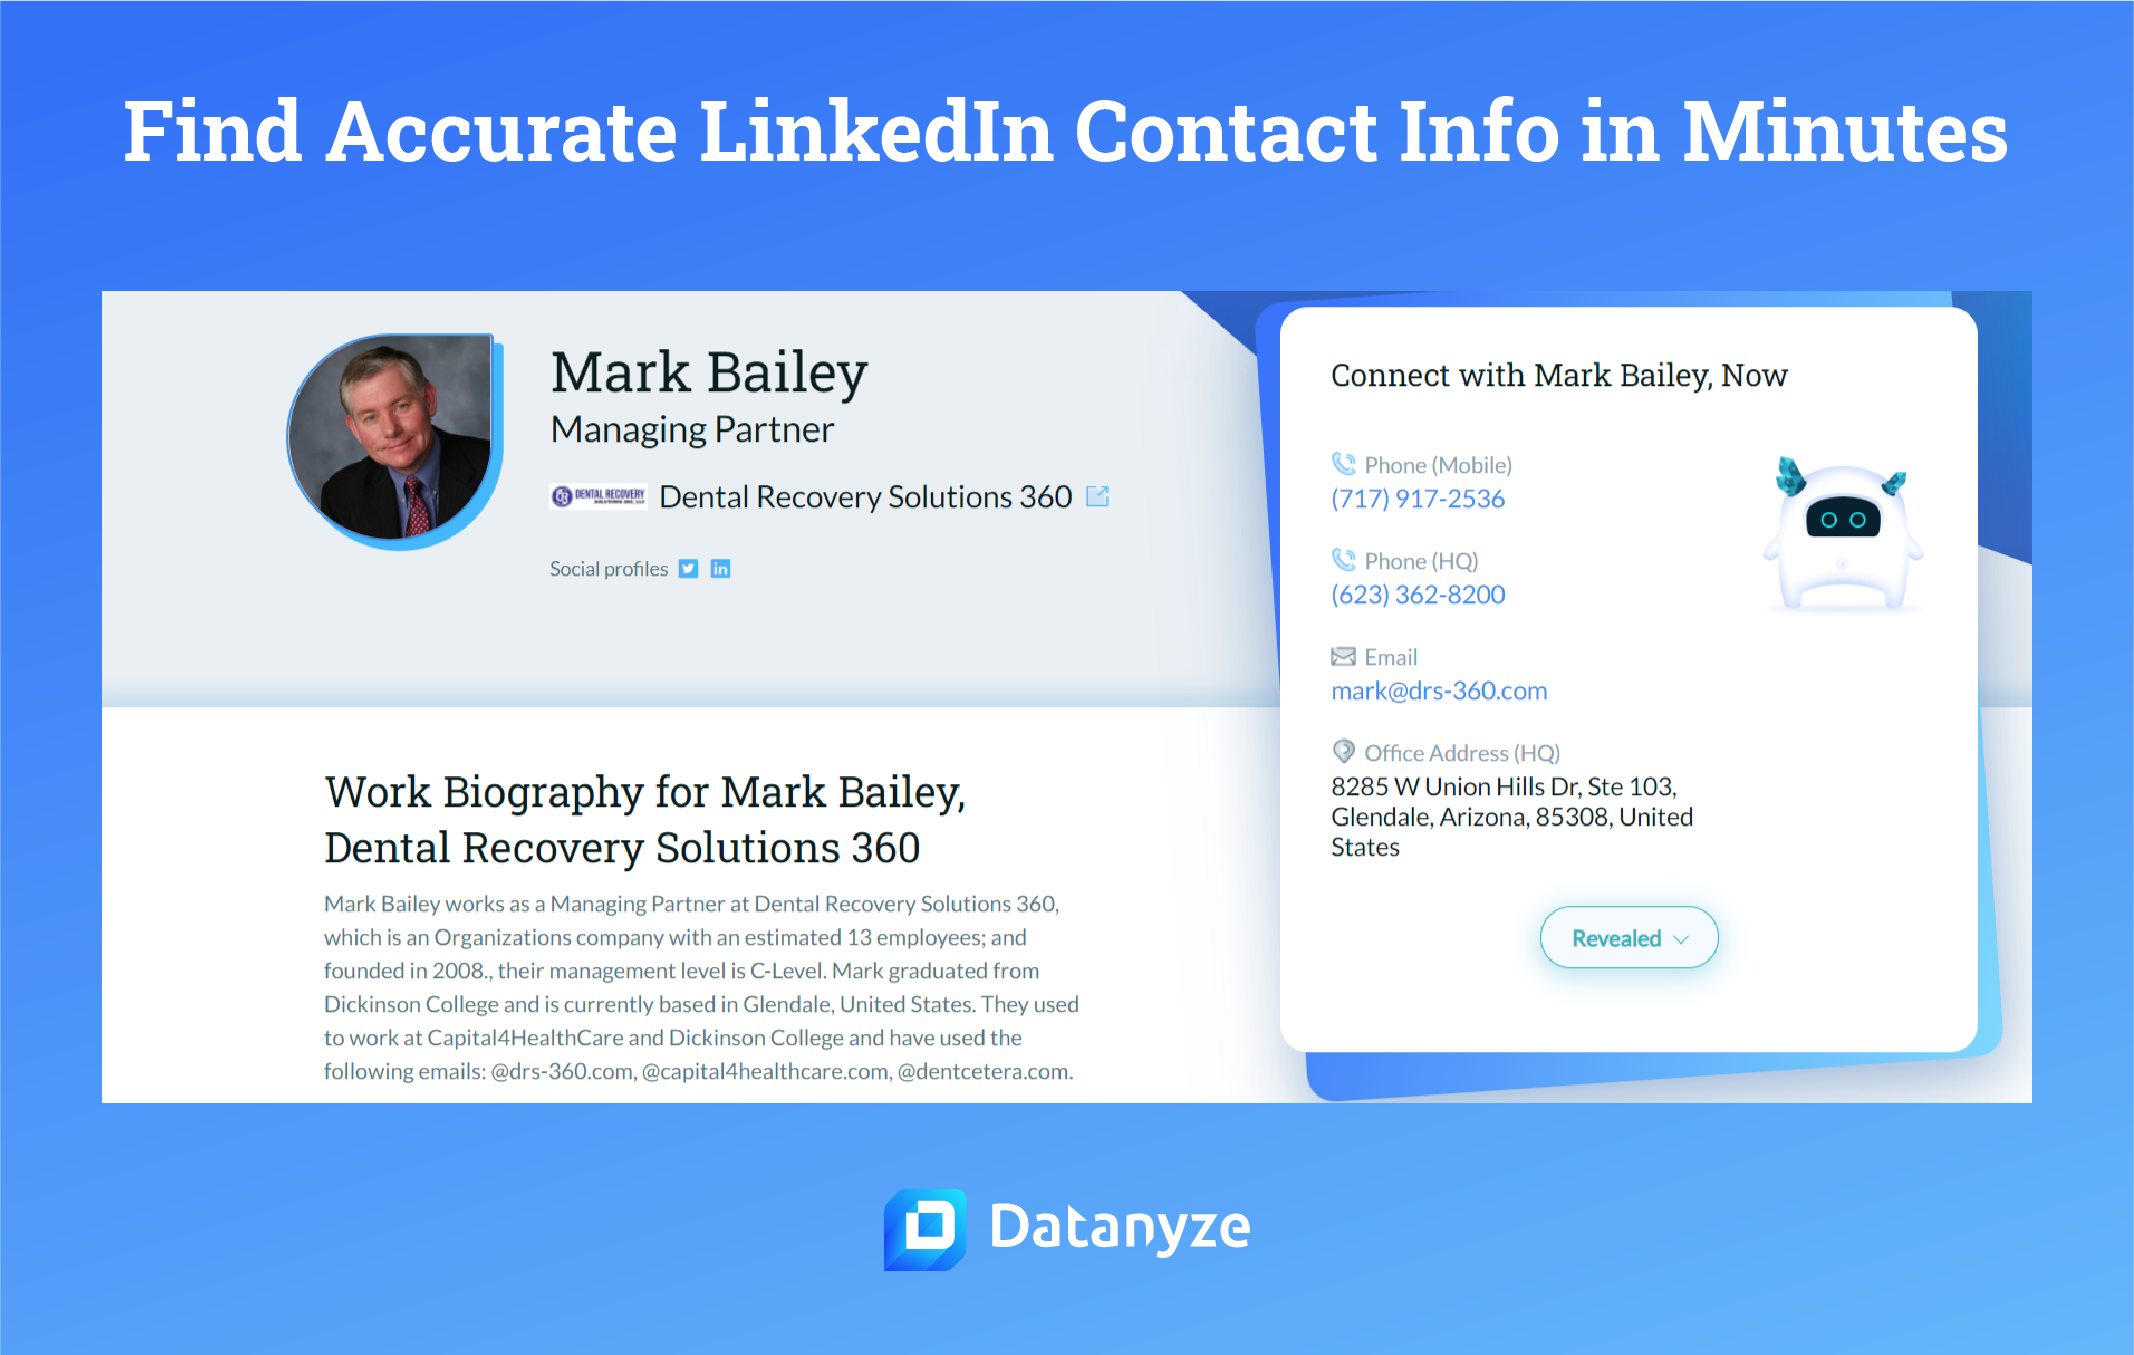 With Datanyze, you can find accurate LinkedIn contact information in minutes